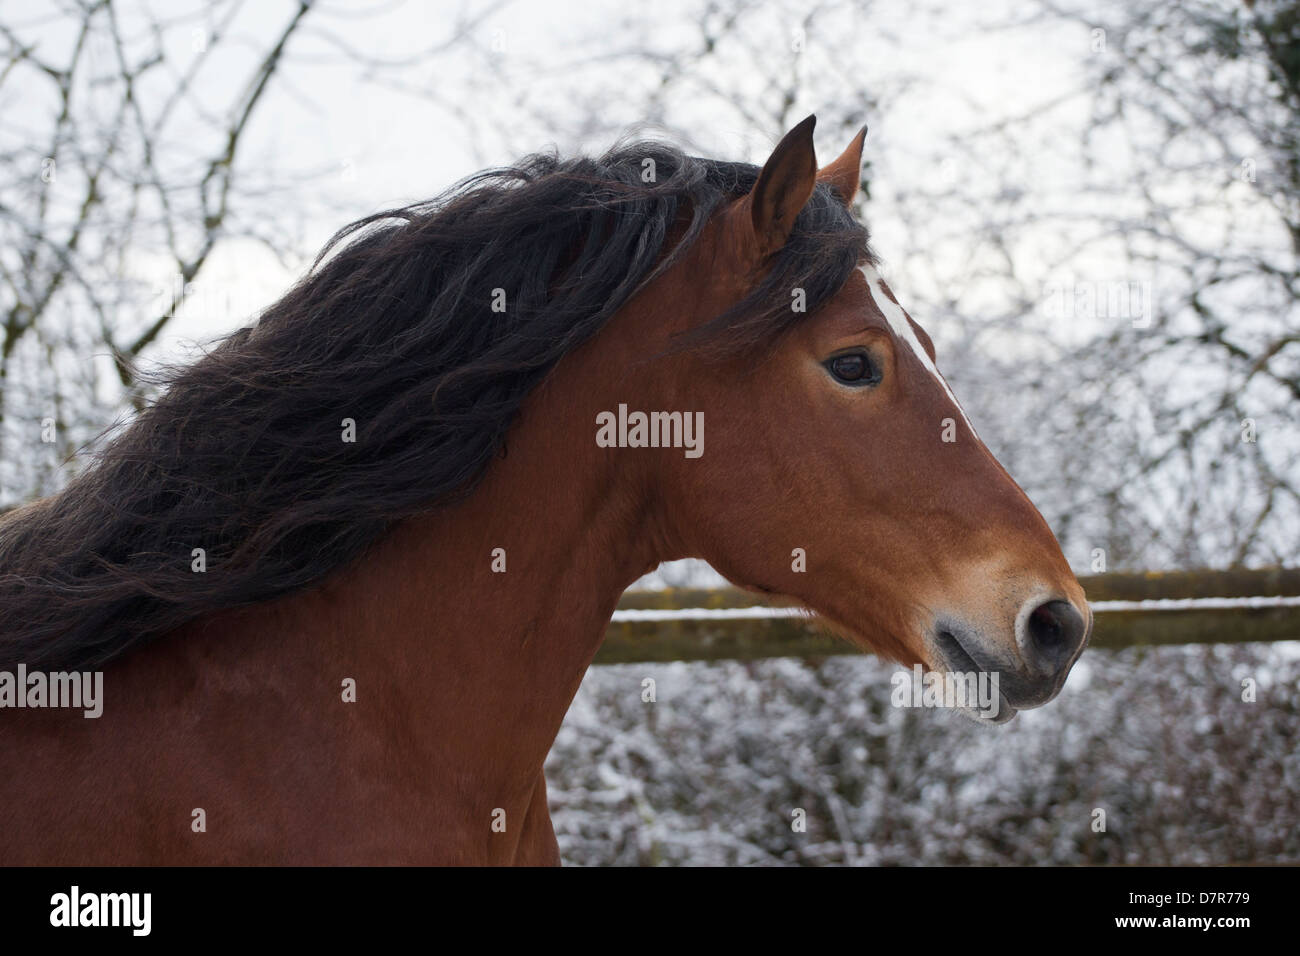 Horse stud Franches-Montagnes Avenches Switzerland Stock Photo